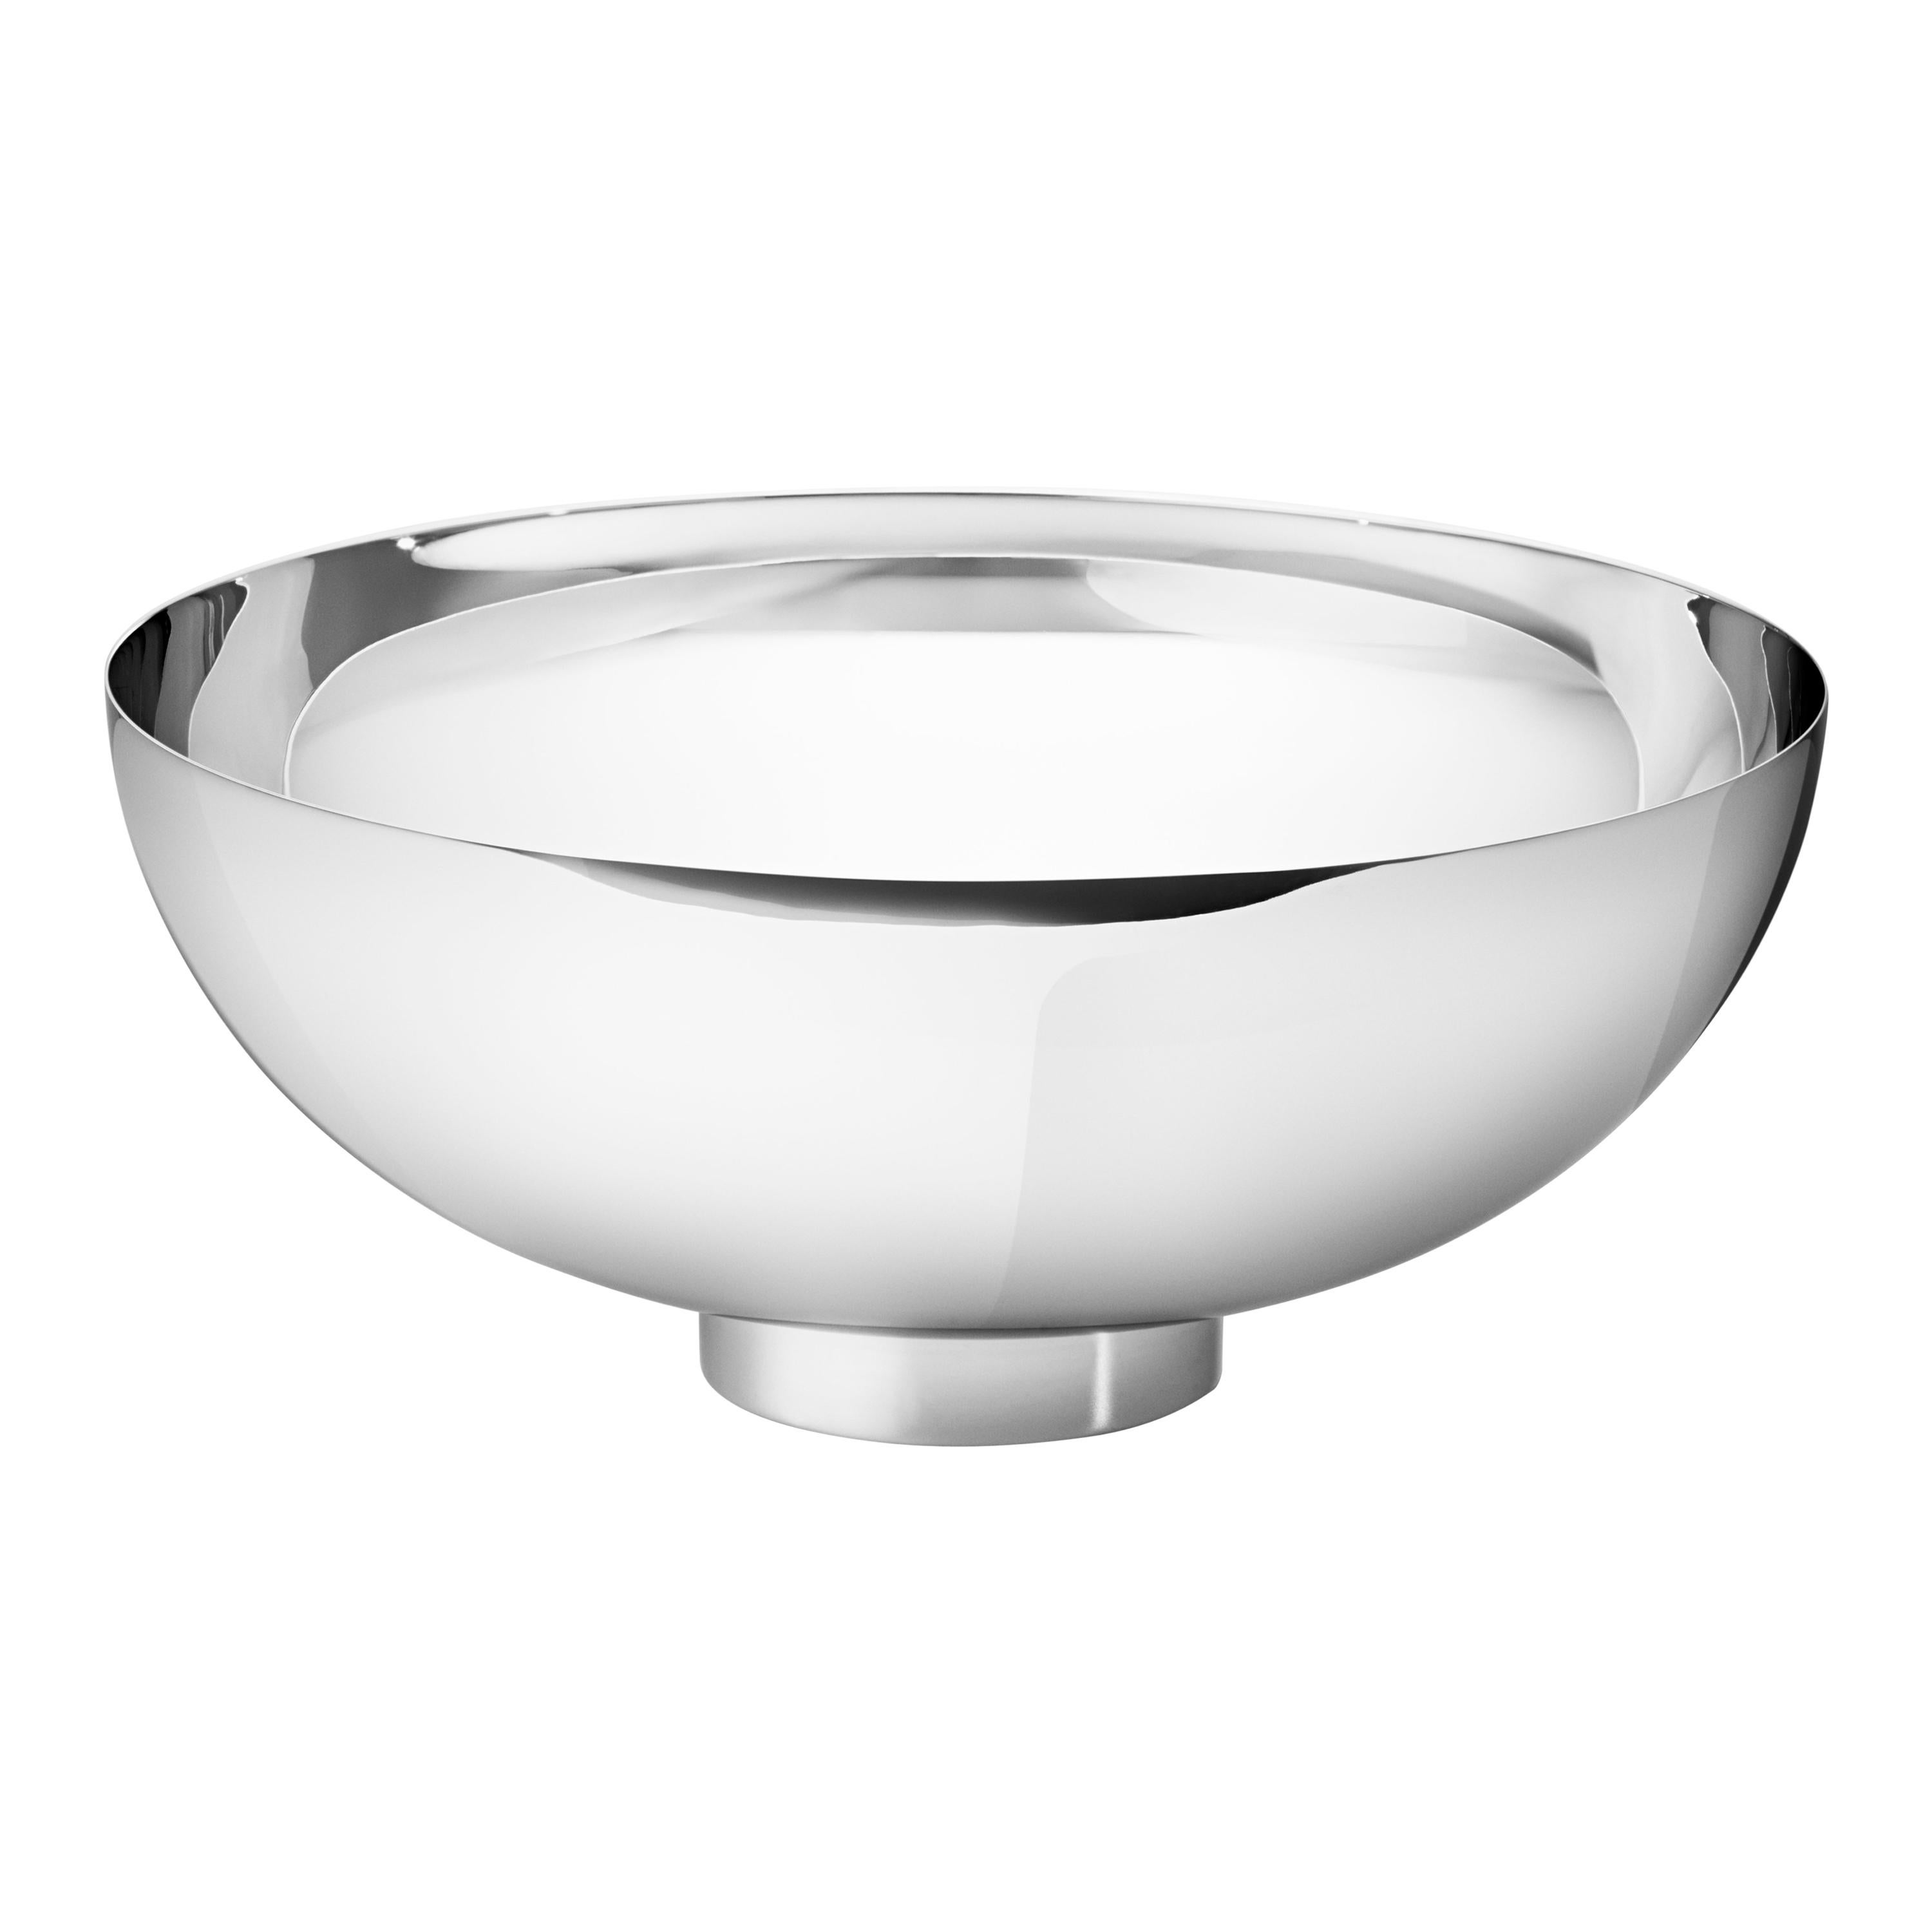 Georg Jensen Ilse Large Bowl in Stainless Steel Mirror Finish by Ilse Crawford